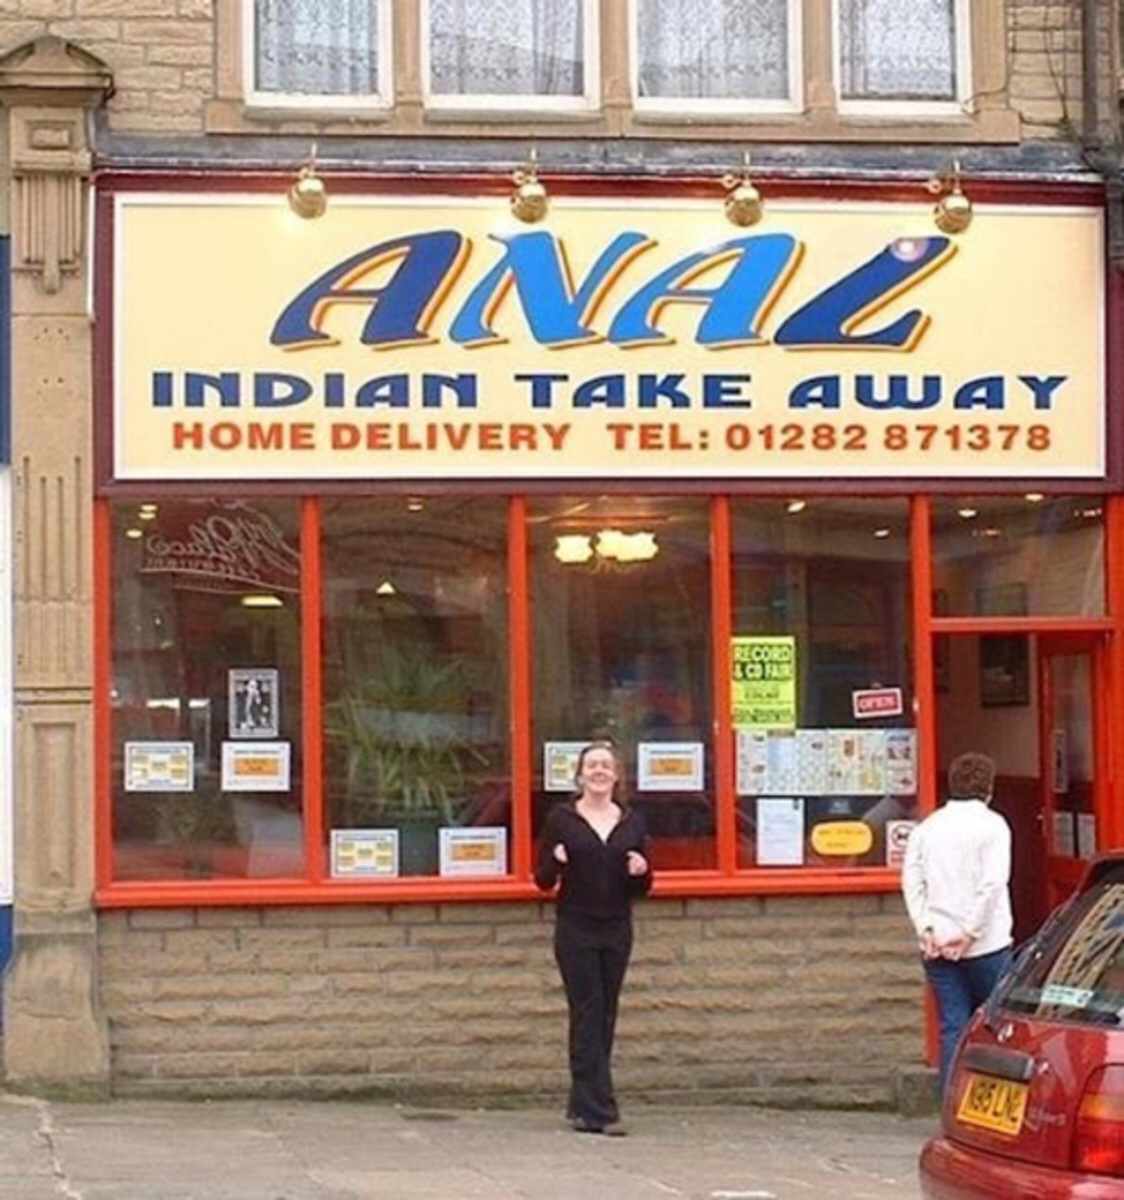 funny restaurant names - Anal Indian Take Away Home Delivery Tel 01282 871378